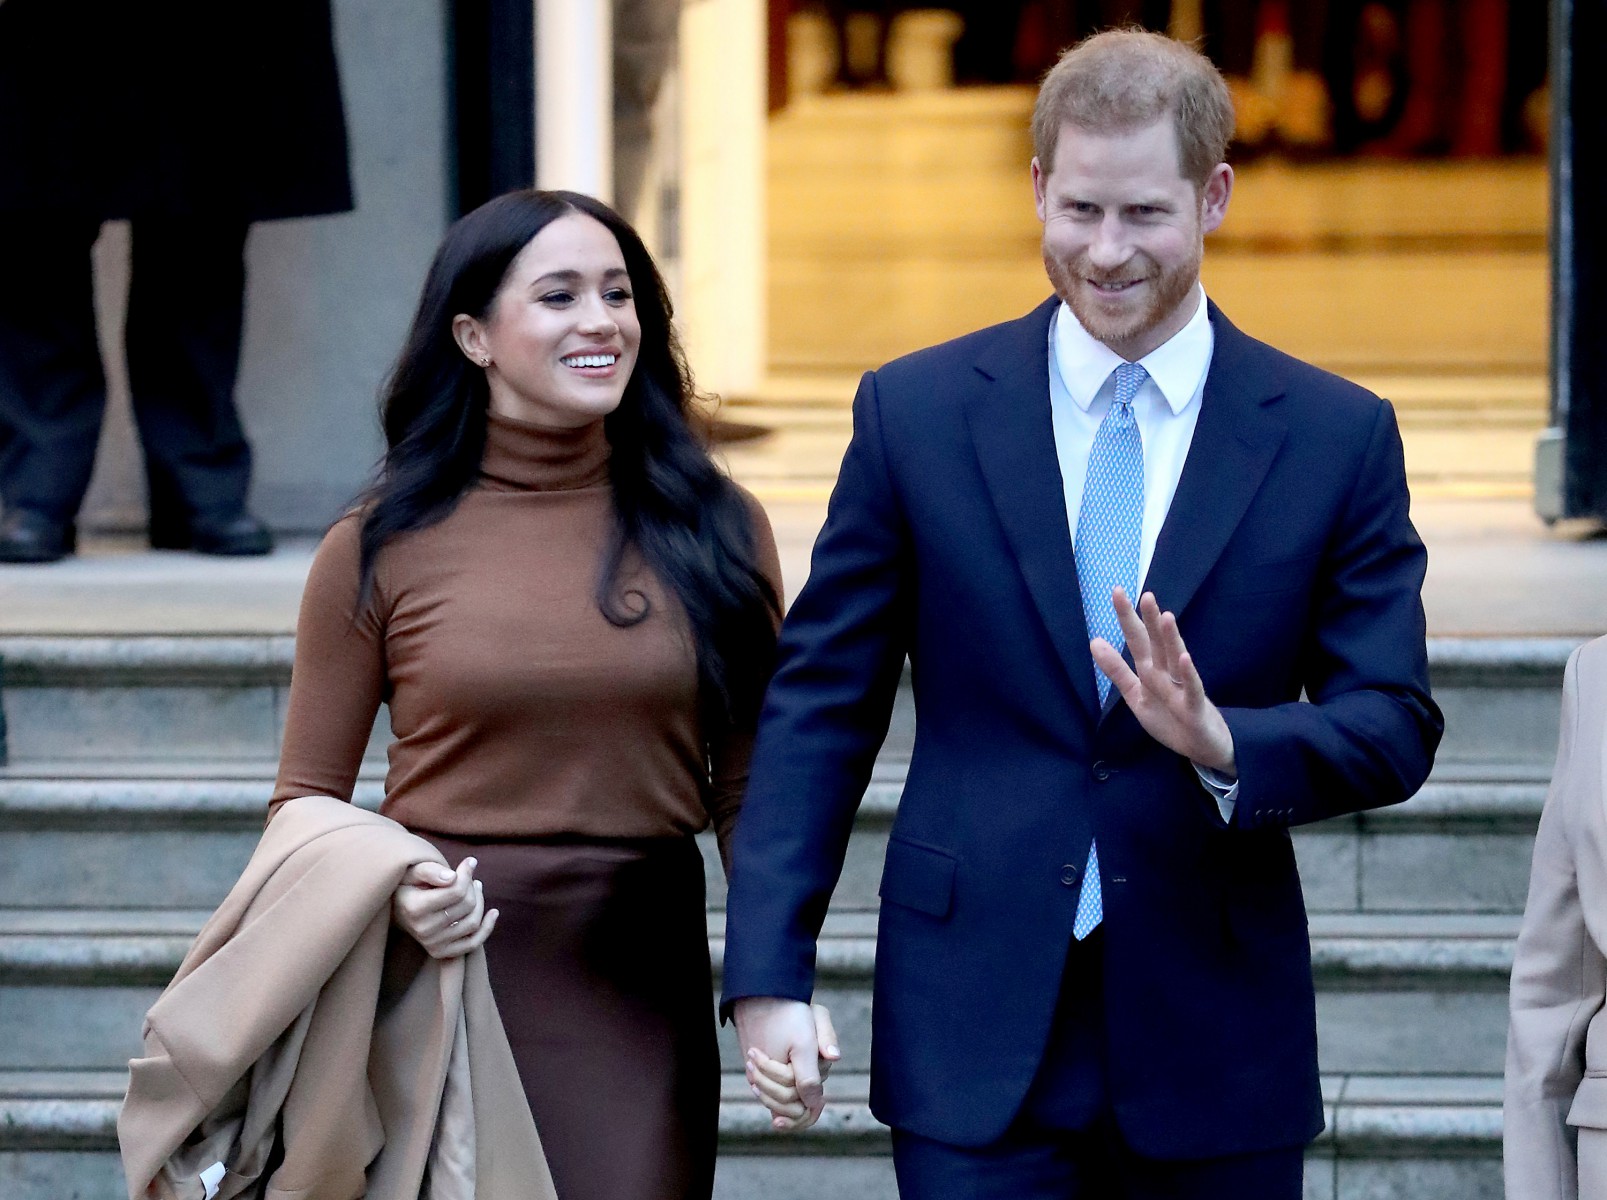 Harry and Megan have said they want to step back from royal duties